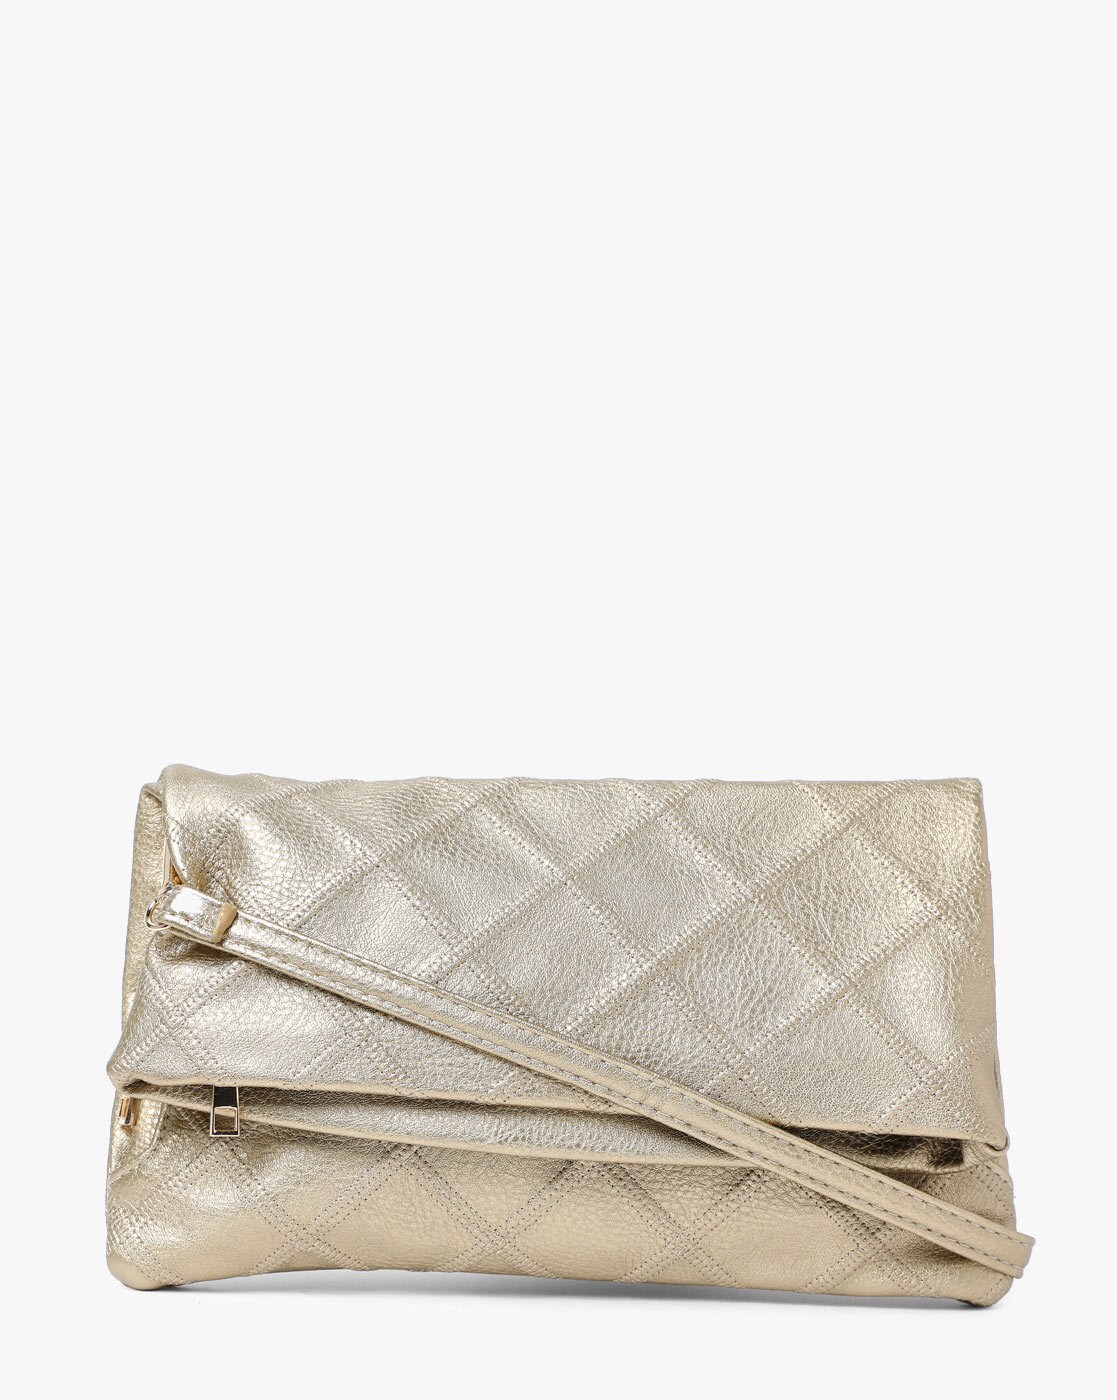 Lino Perros - Clutch the day or Sling it on: Which Lino